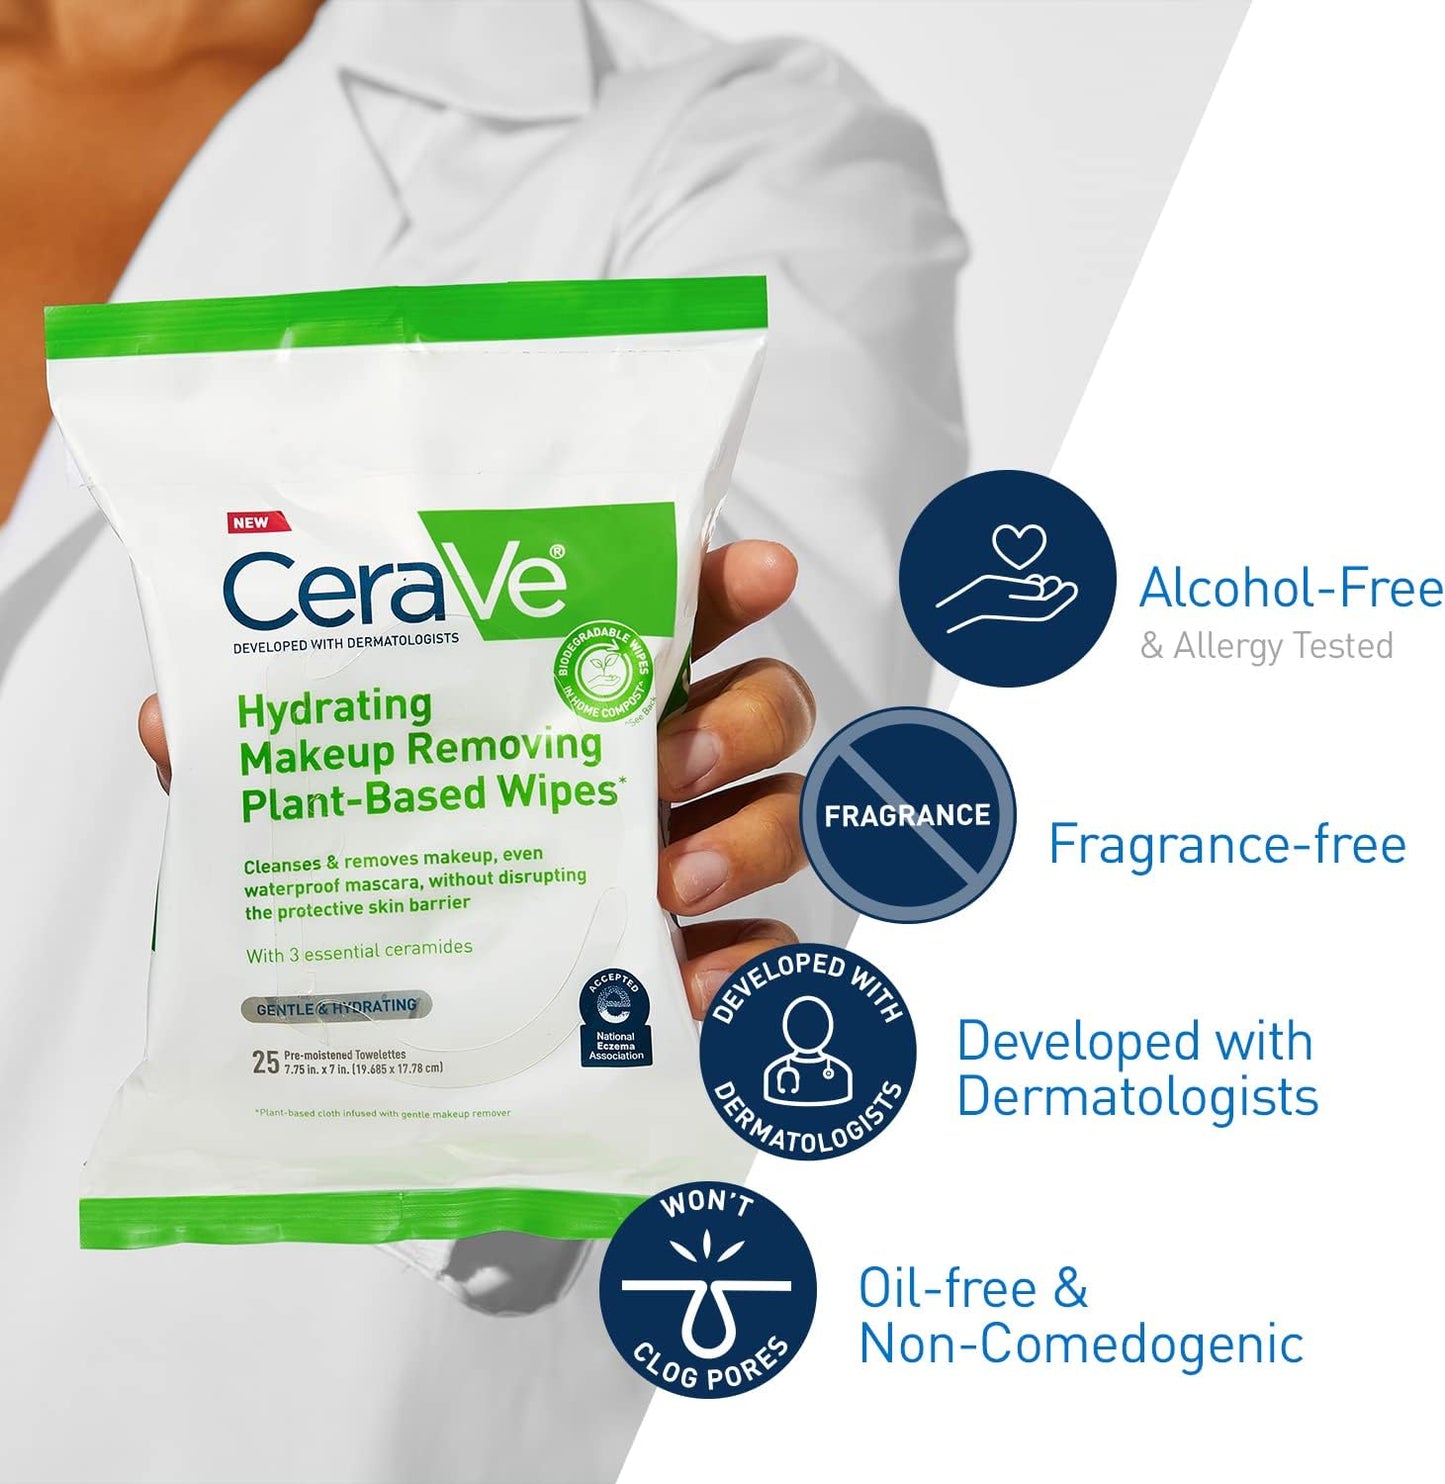 CeraVe Hydrating Facial Cleansing Makeup Remover Wipes| Plant Based Face Biodegradable in Home Compost| Wash Cloth| Suitable for Sensitive Skin| Fragrance-free Non-comedogenic